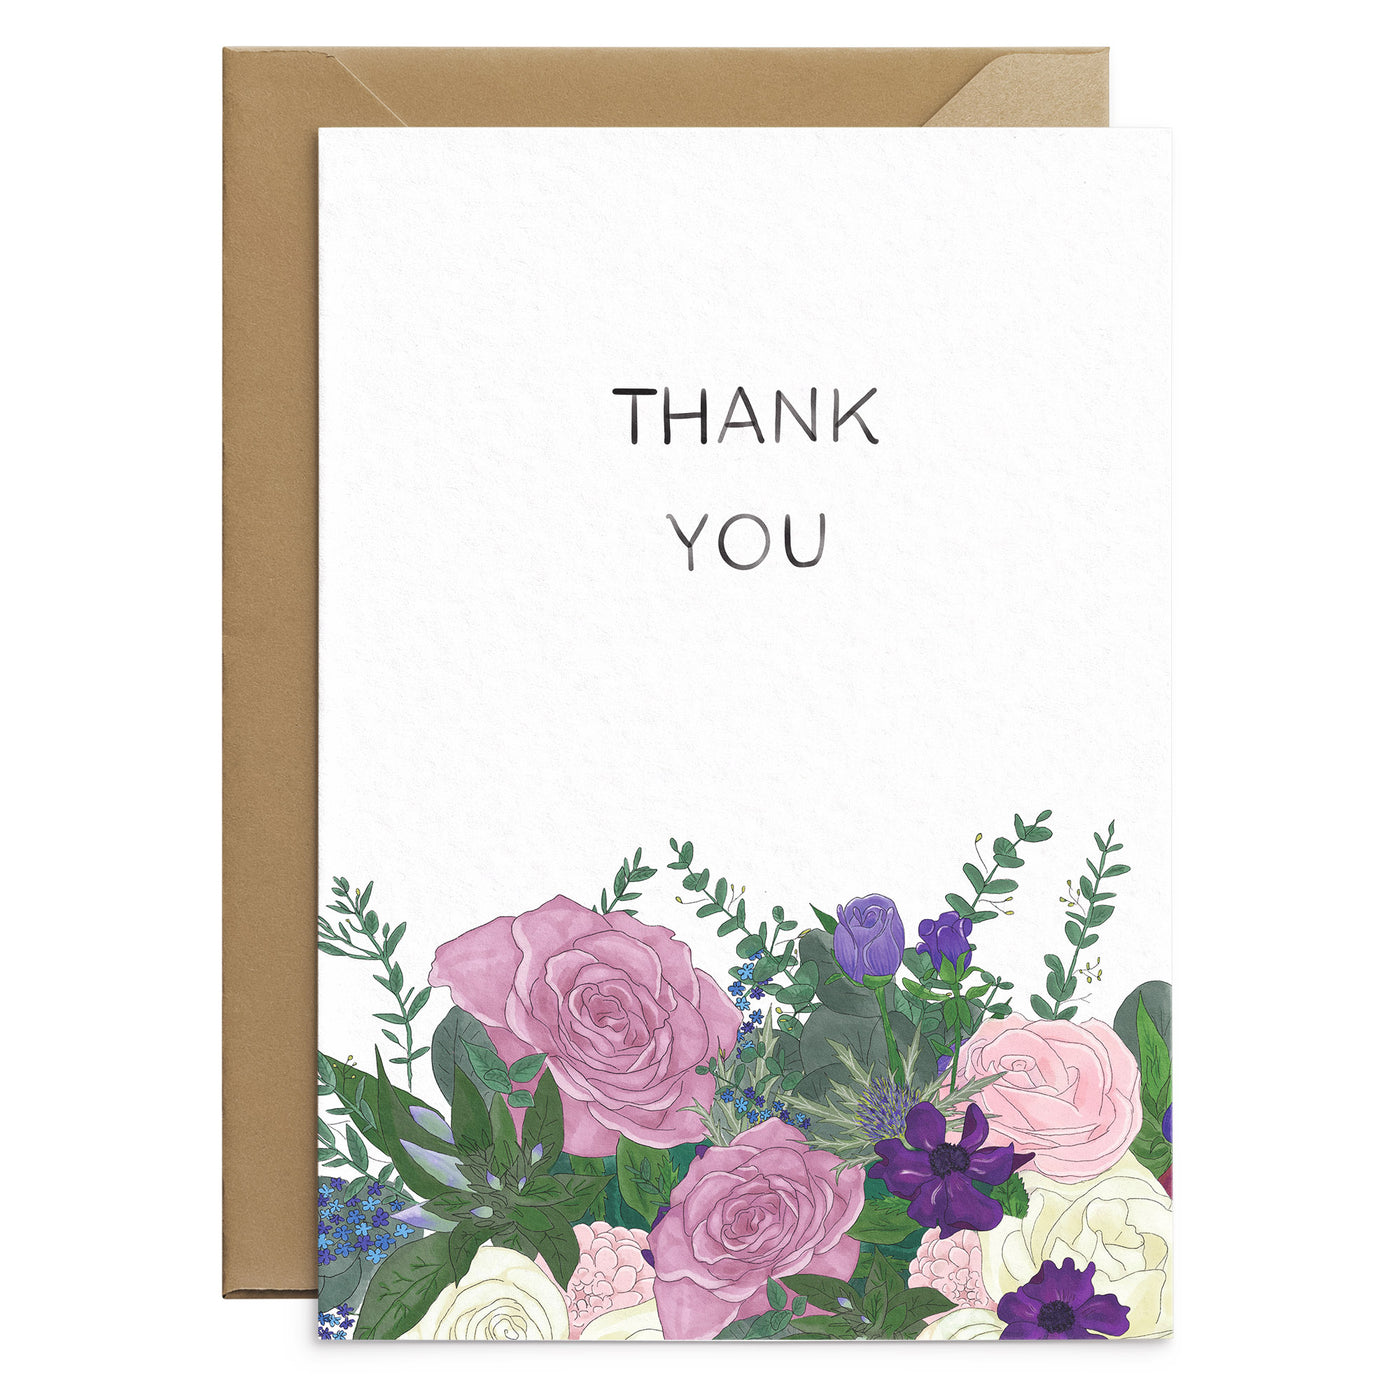 Pink-rose-purple-anemone-thank-you-card-floral-illustration-greetings-card-poppins-and-co